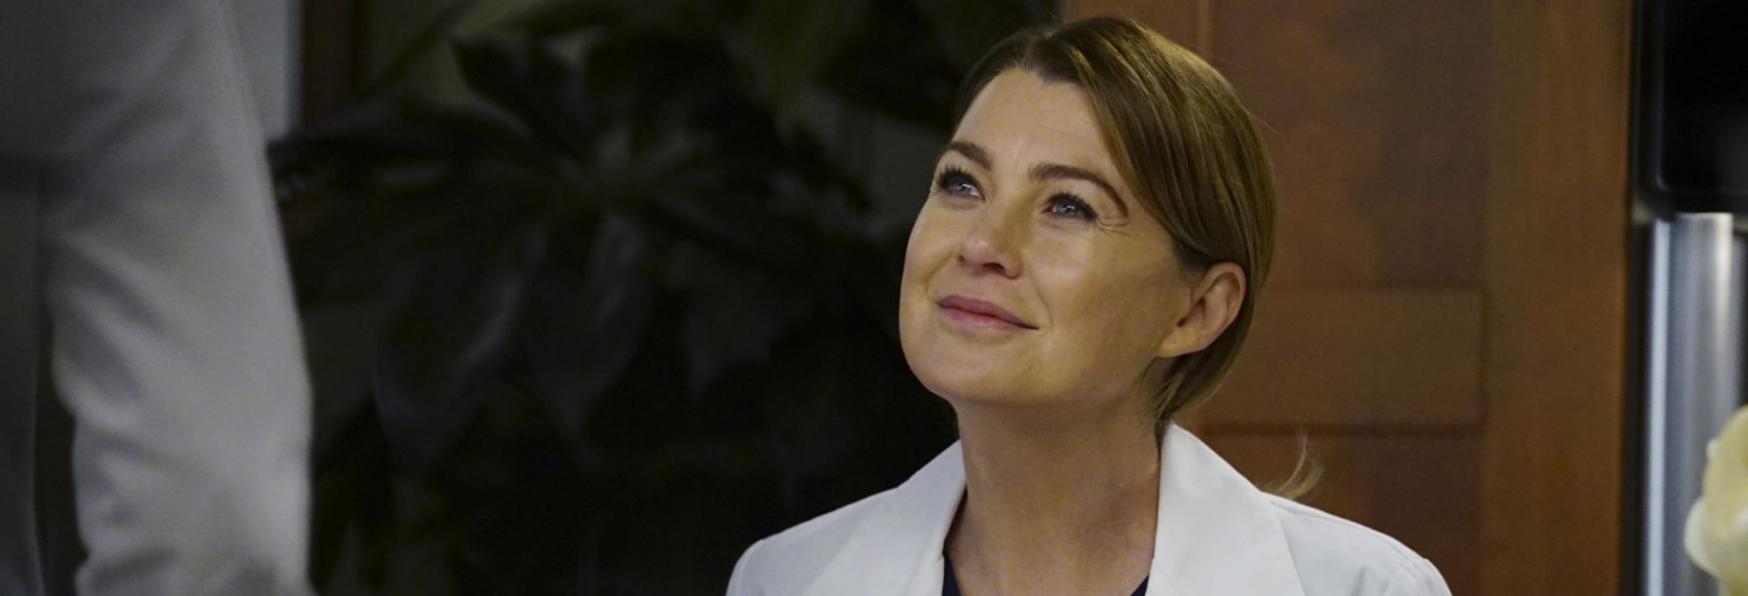 Grey's Anatomy 20 will be there!  ABC is renewing the TV series for a new season